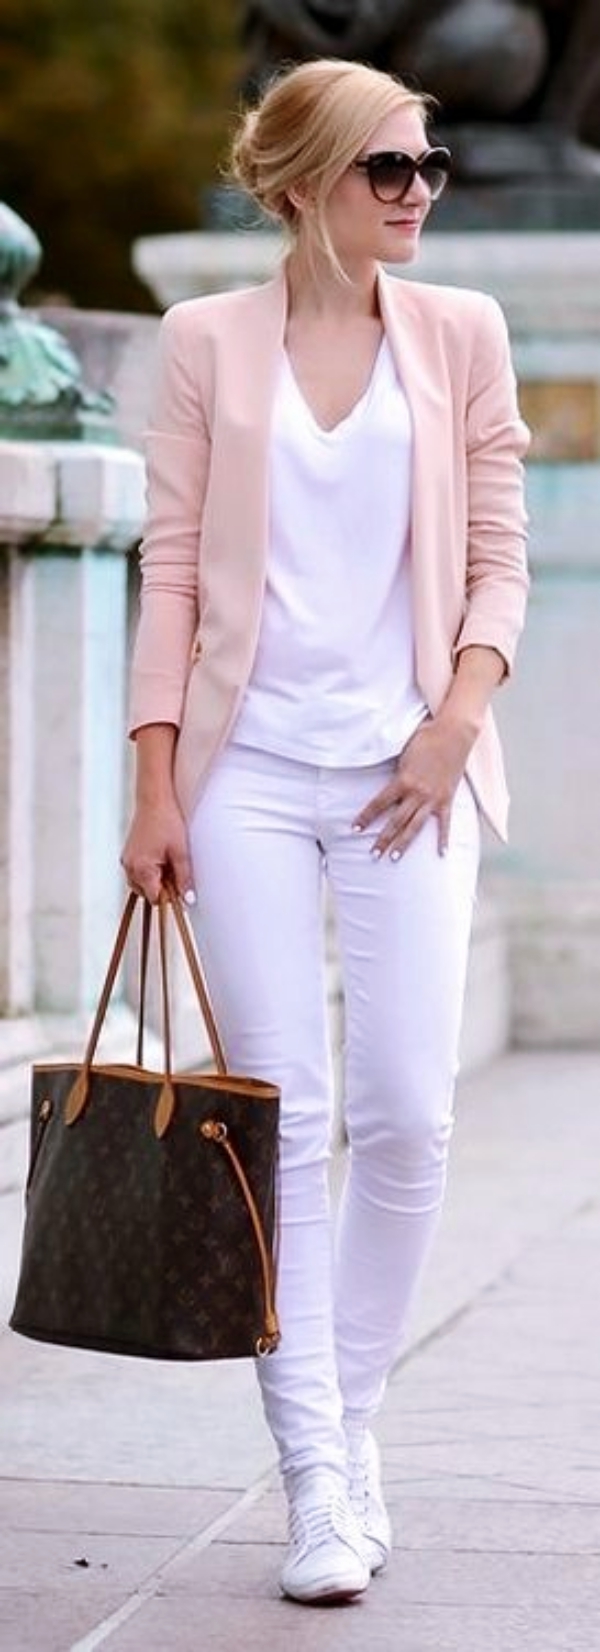 Informal-Work-Outfits-With-Sneakers